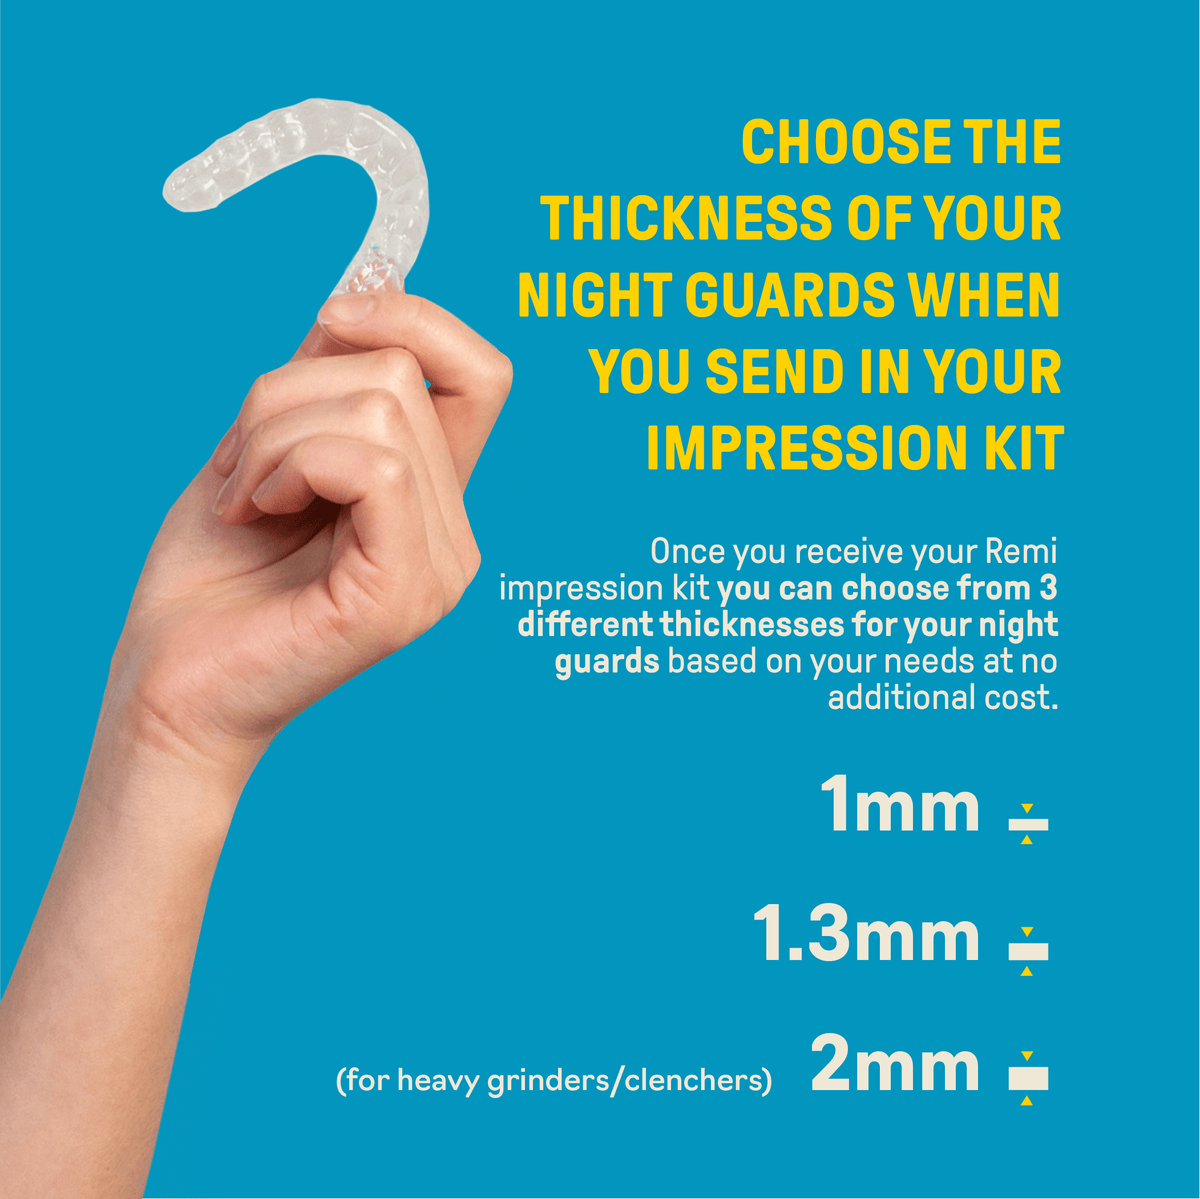 Choose the thickness of your Maintain Oral Hygiene when you send your impression kit.